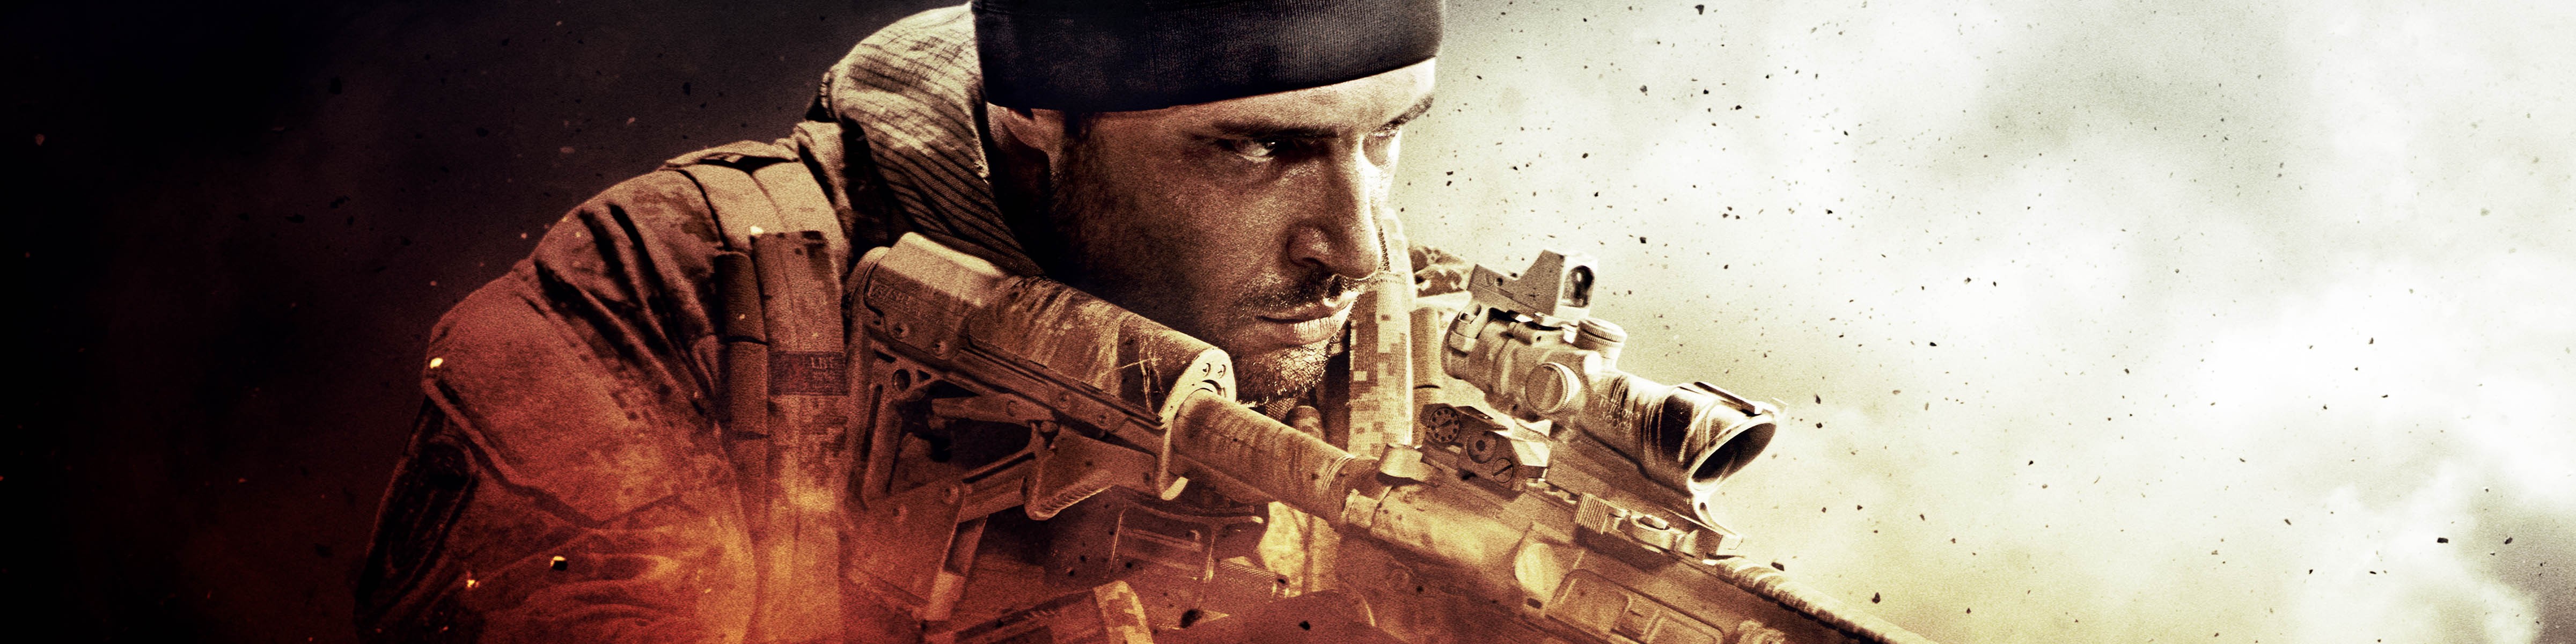 Medal Of Honor Warfighter For Pc Origin